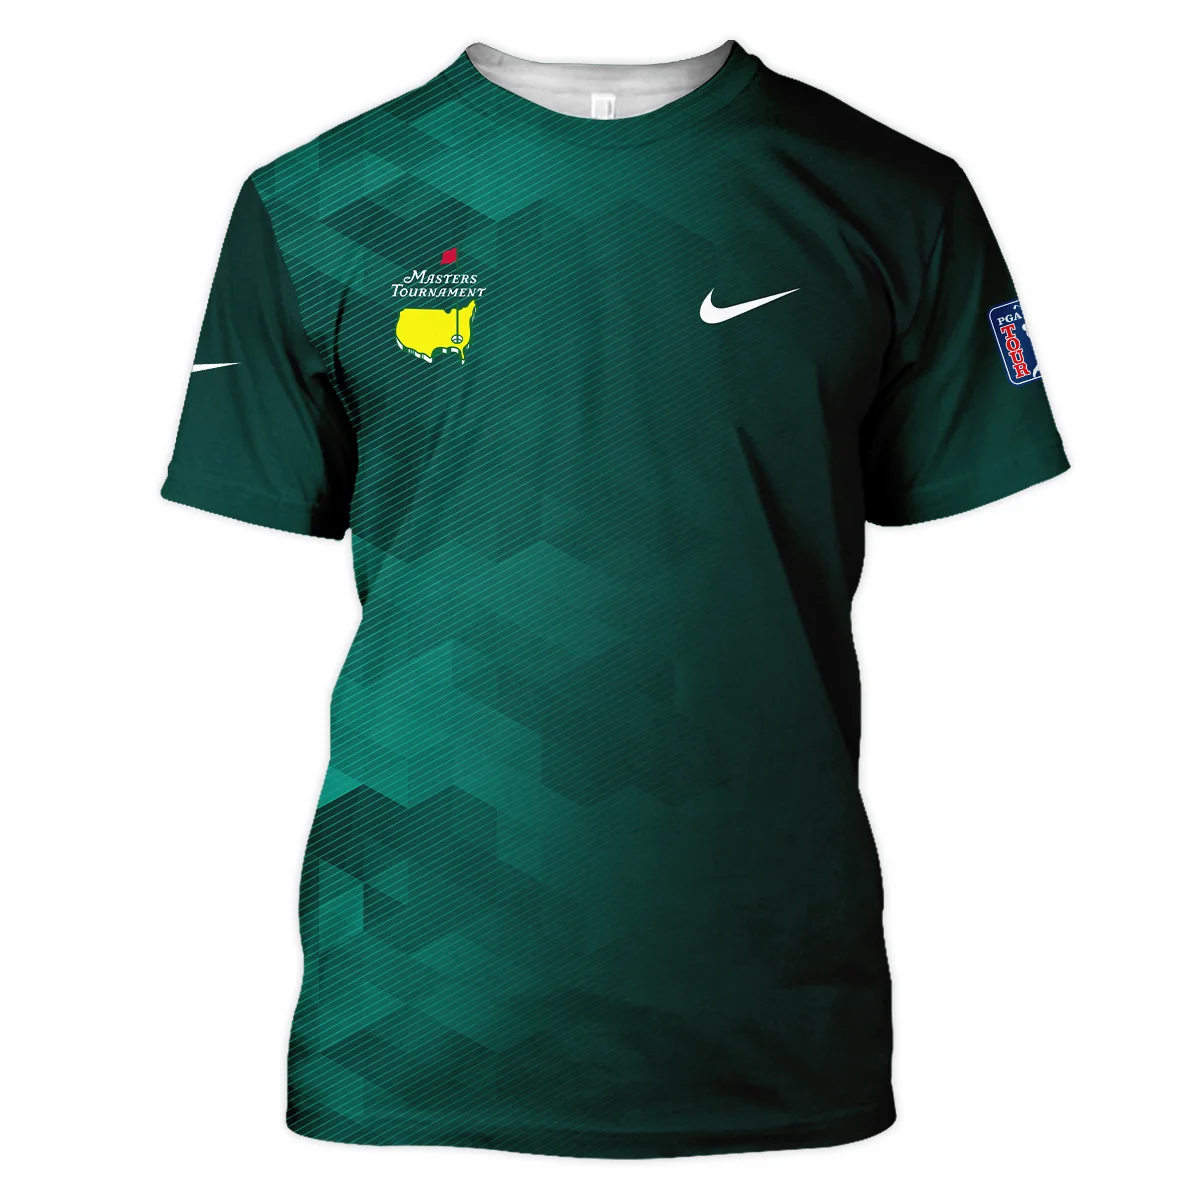 Nike Golf Sport Dark Green Gradient Abstract Background Masters Tournament Unisex T-Shirt Style Classic T-Shirt